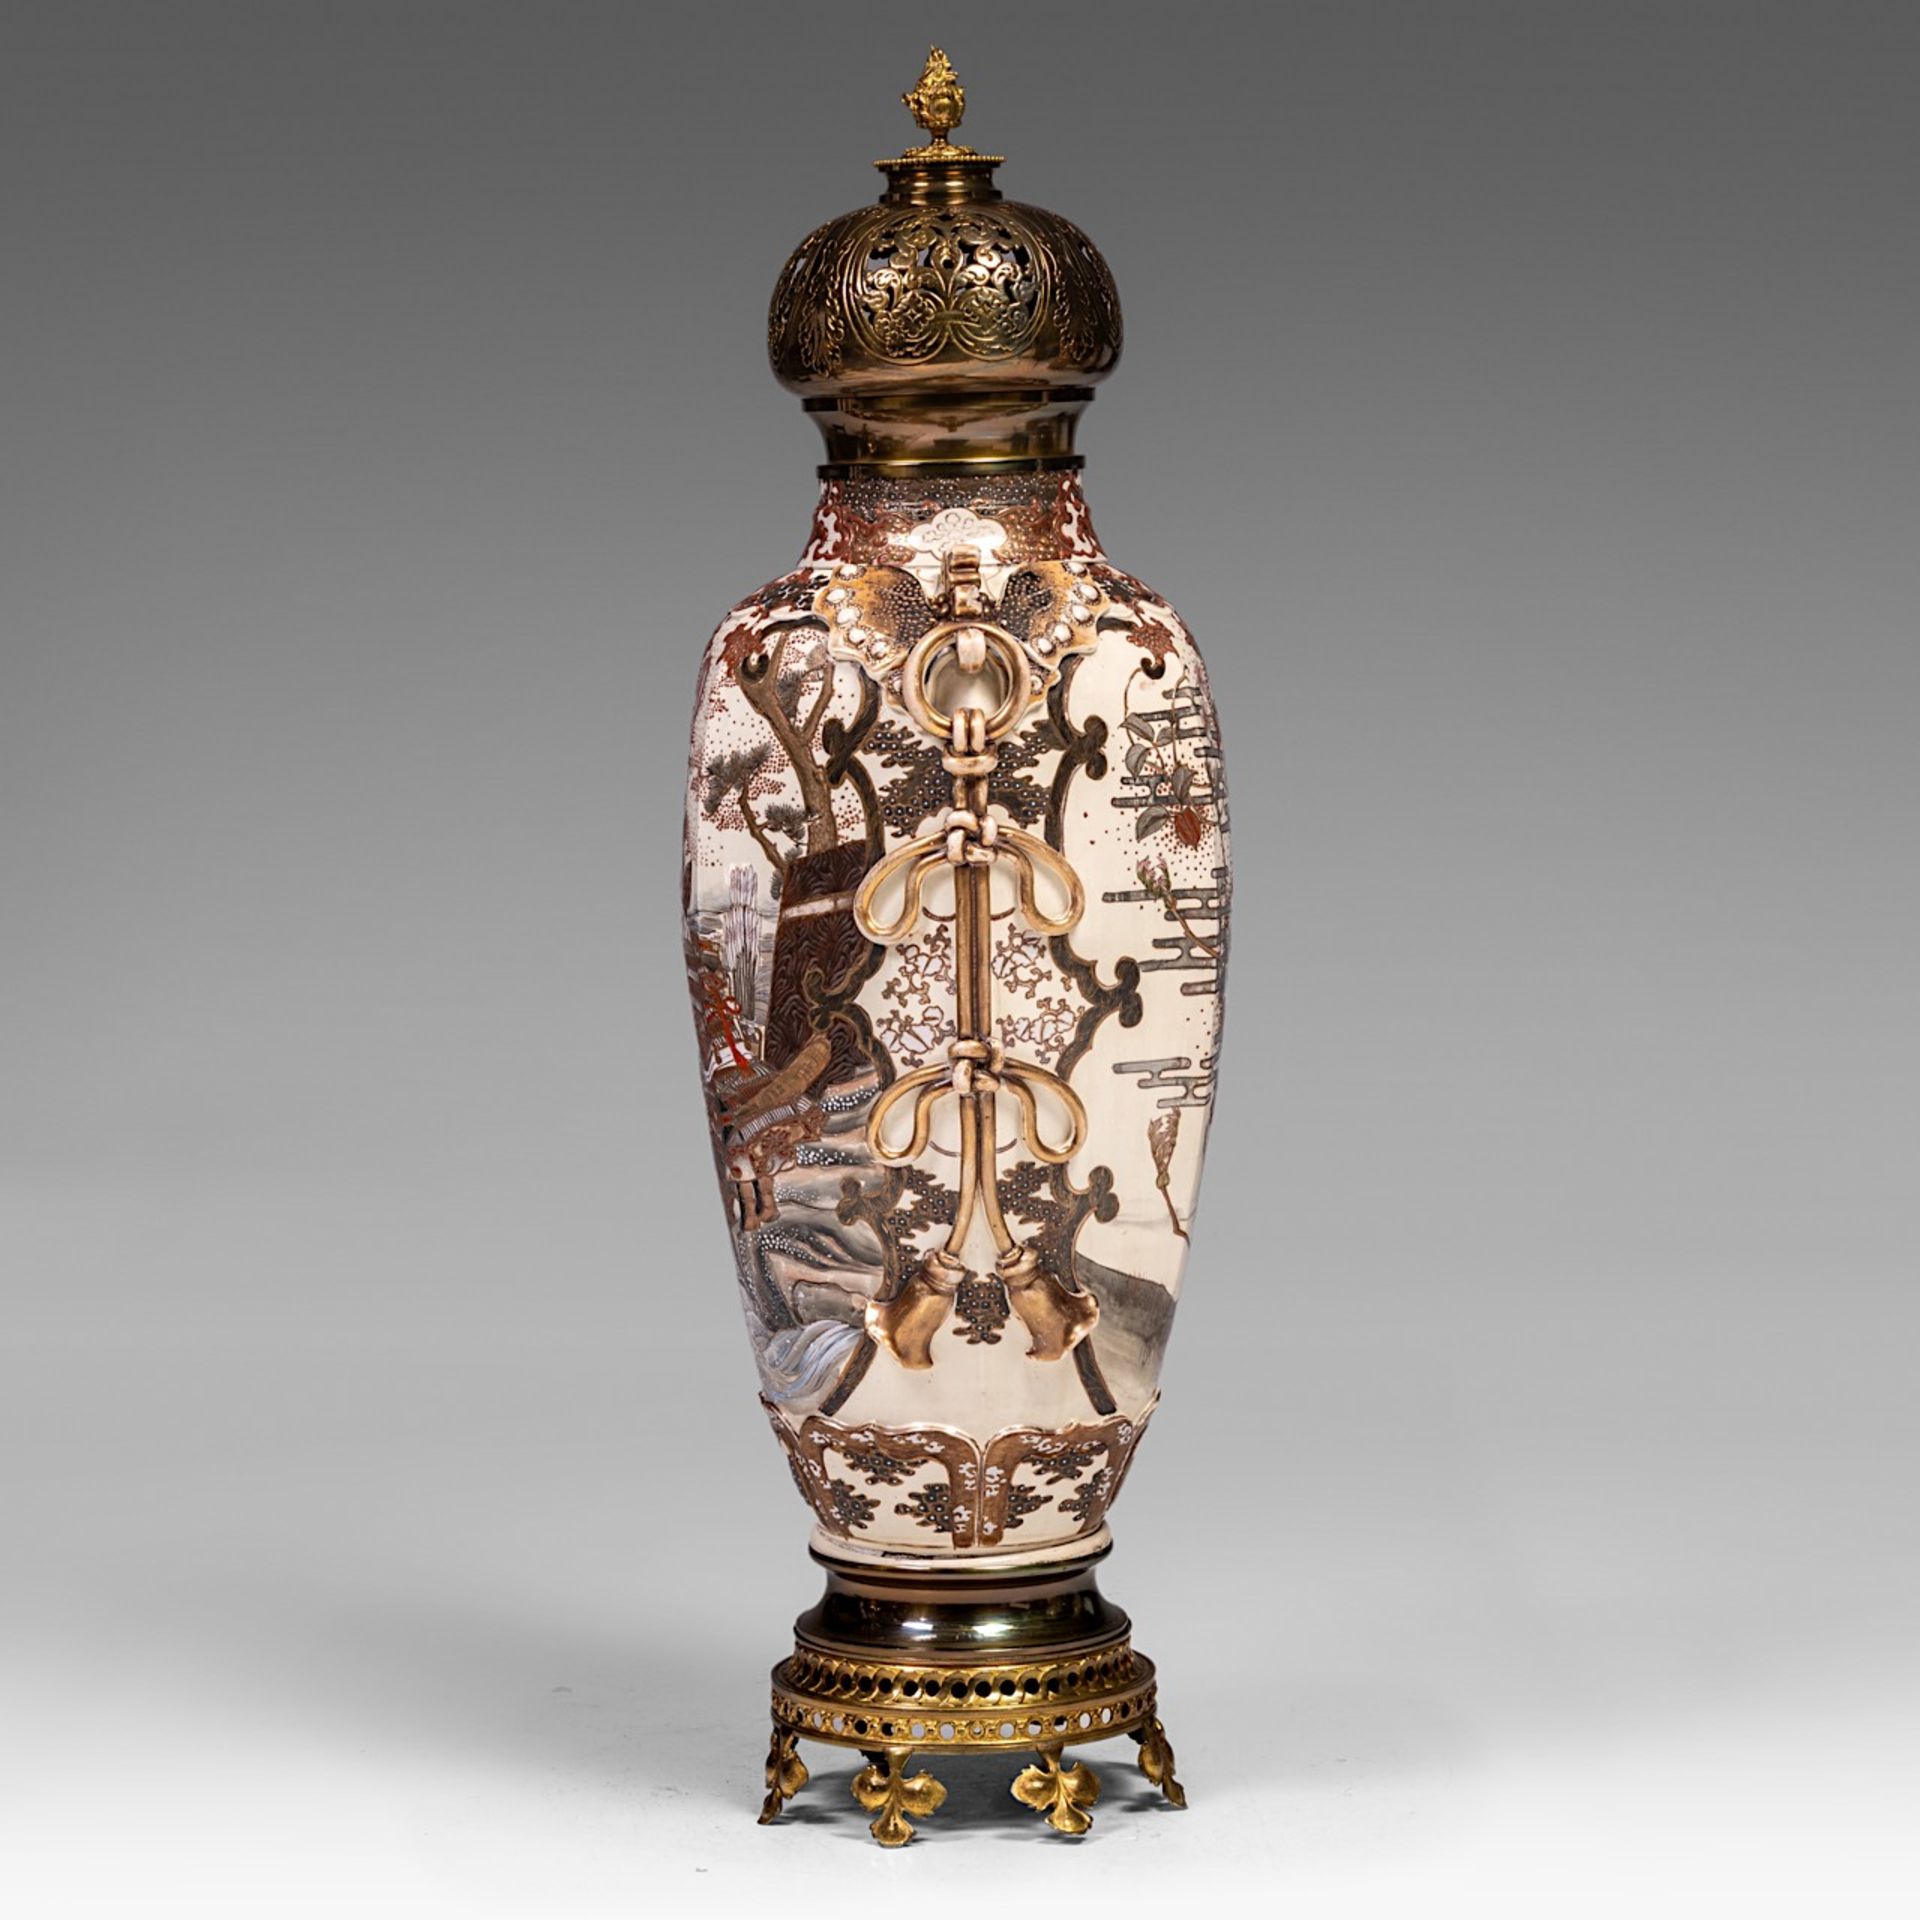 A large Japanese Satsuma vase with gilt bronze lid and base, late 19thC/20thC, total H 108 cm - Image 4 of 6